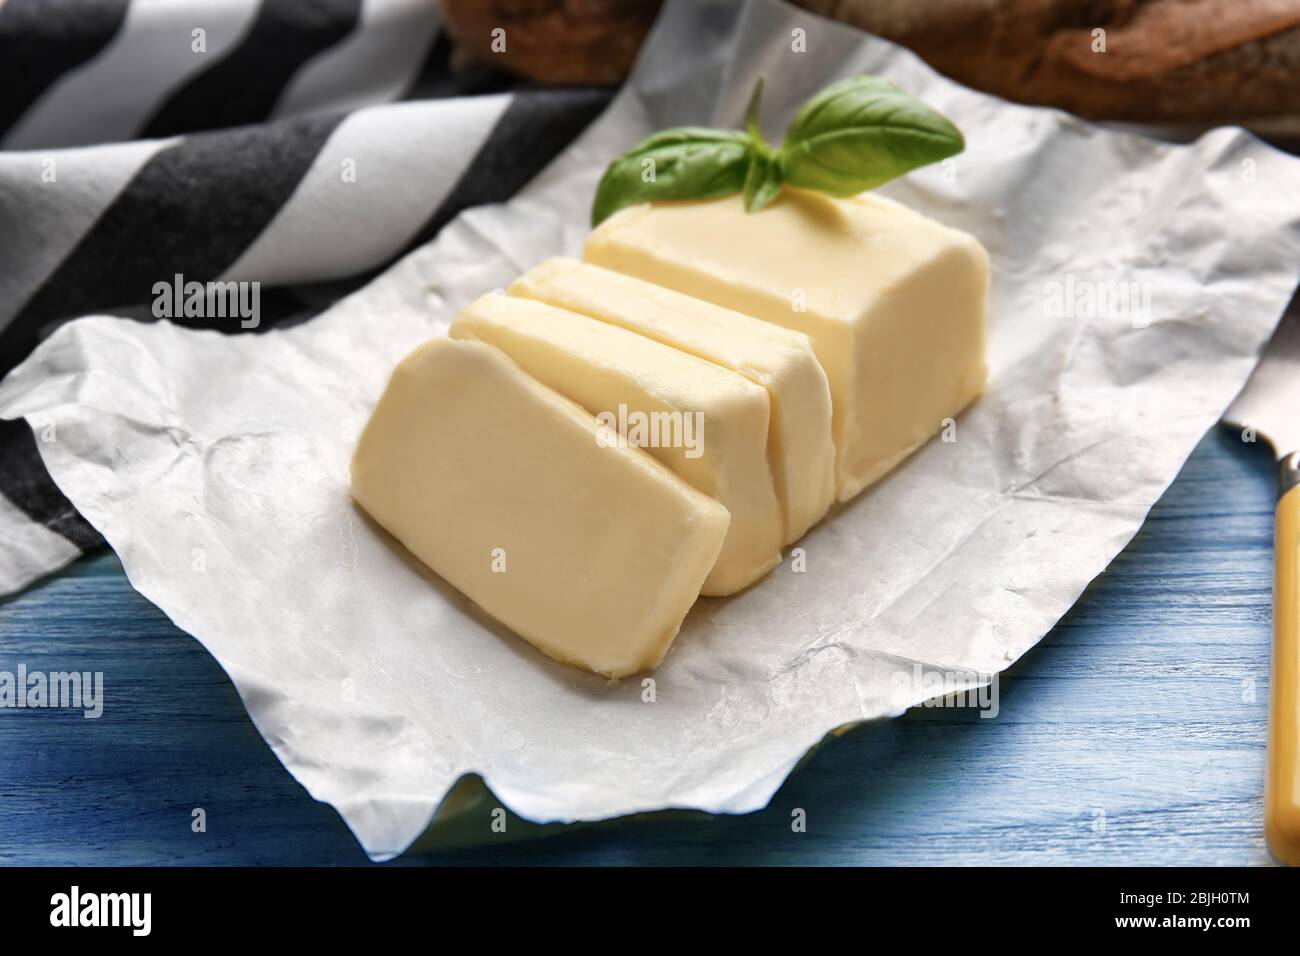 Piece of unwrapped butter on wooden table Stock Photo